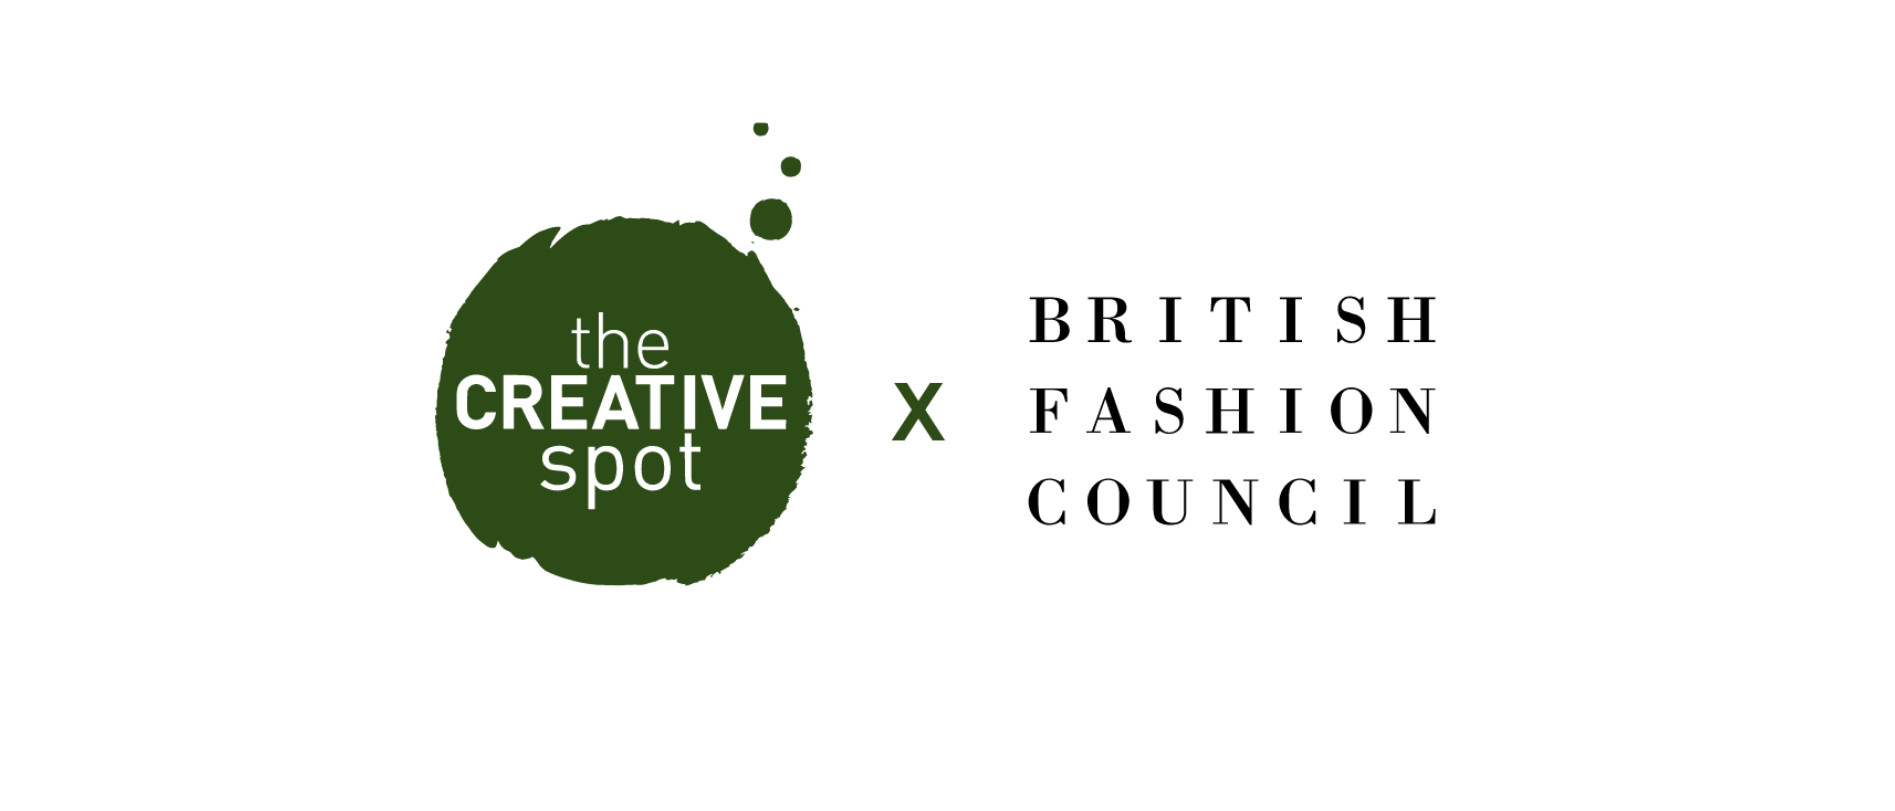 The creative spot x british fashion council pop up boutique, designed by richard quinn, opens at bicester village in celebration of british talent